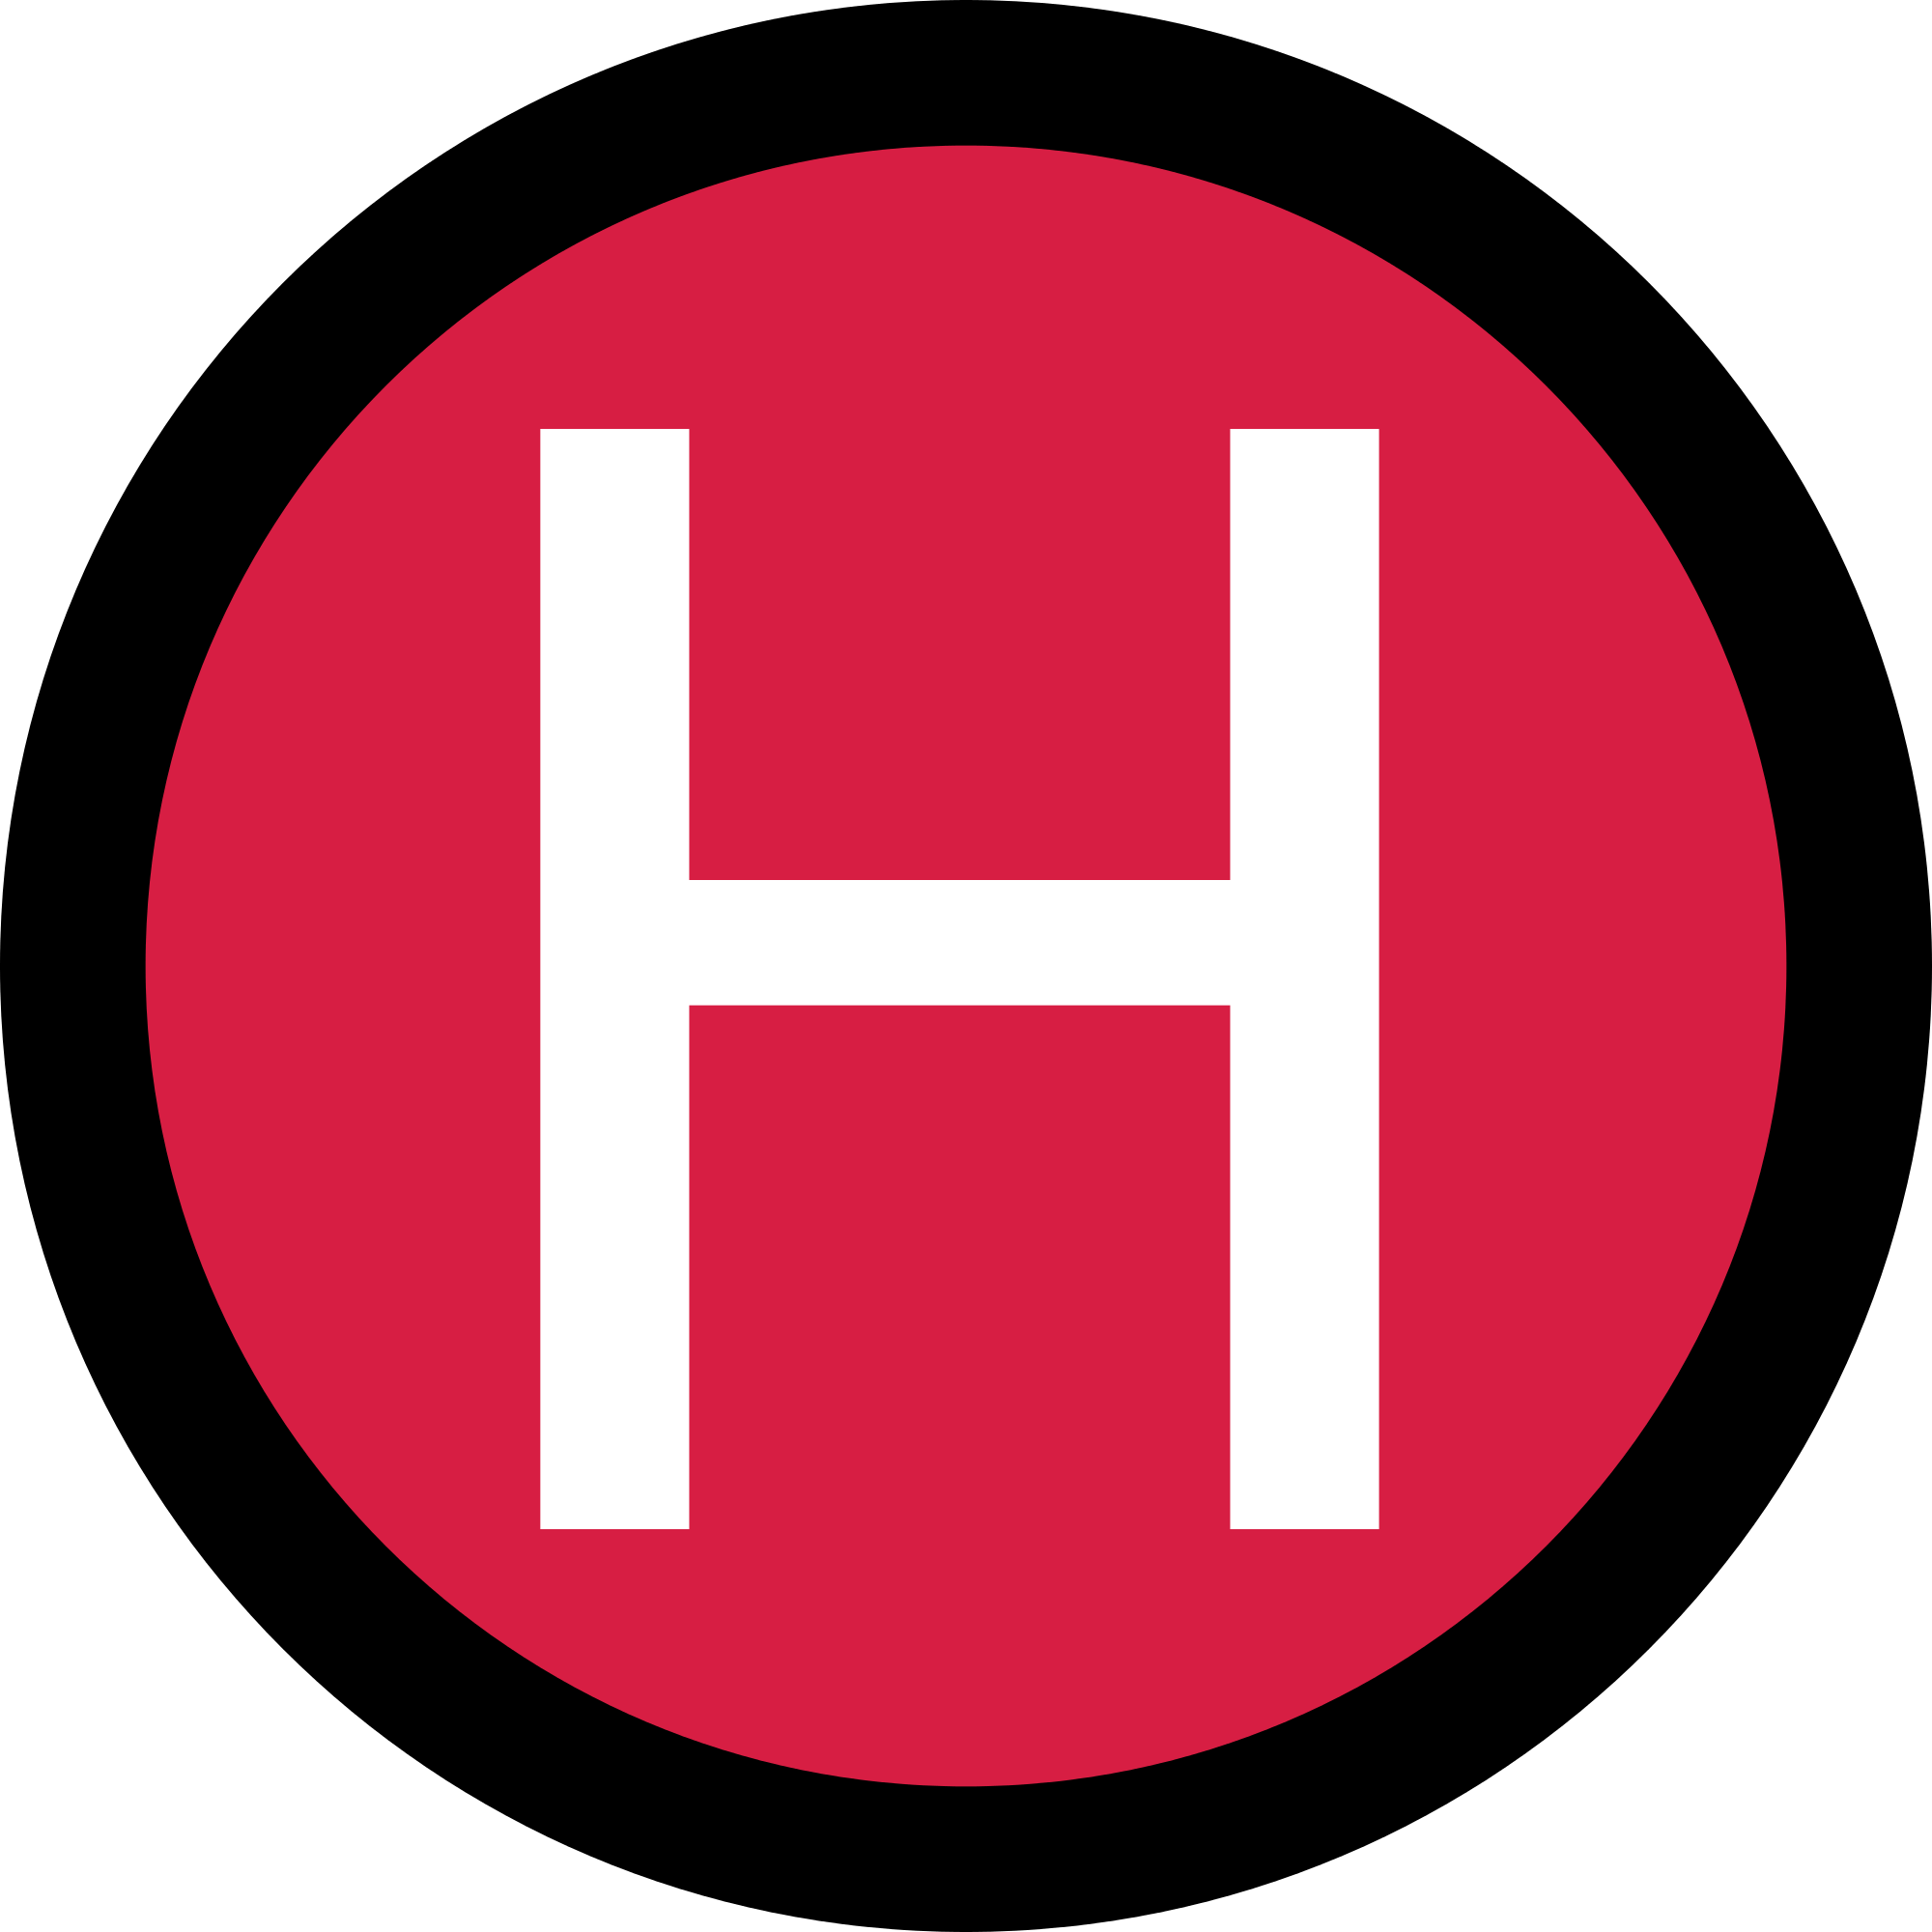 Red H in Circle Logo - File:UCSD Shuttle H icon.svg - Wikimedia Commons